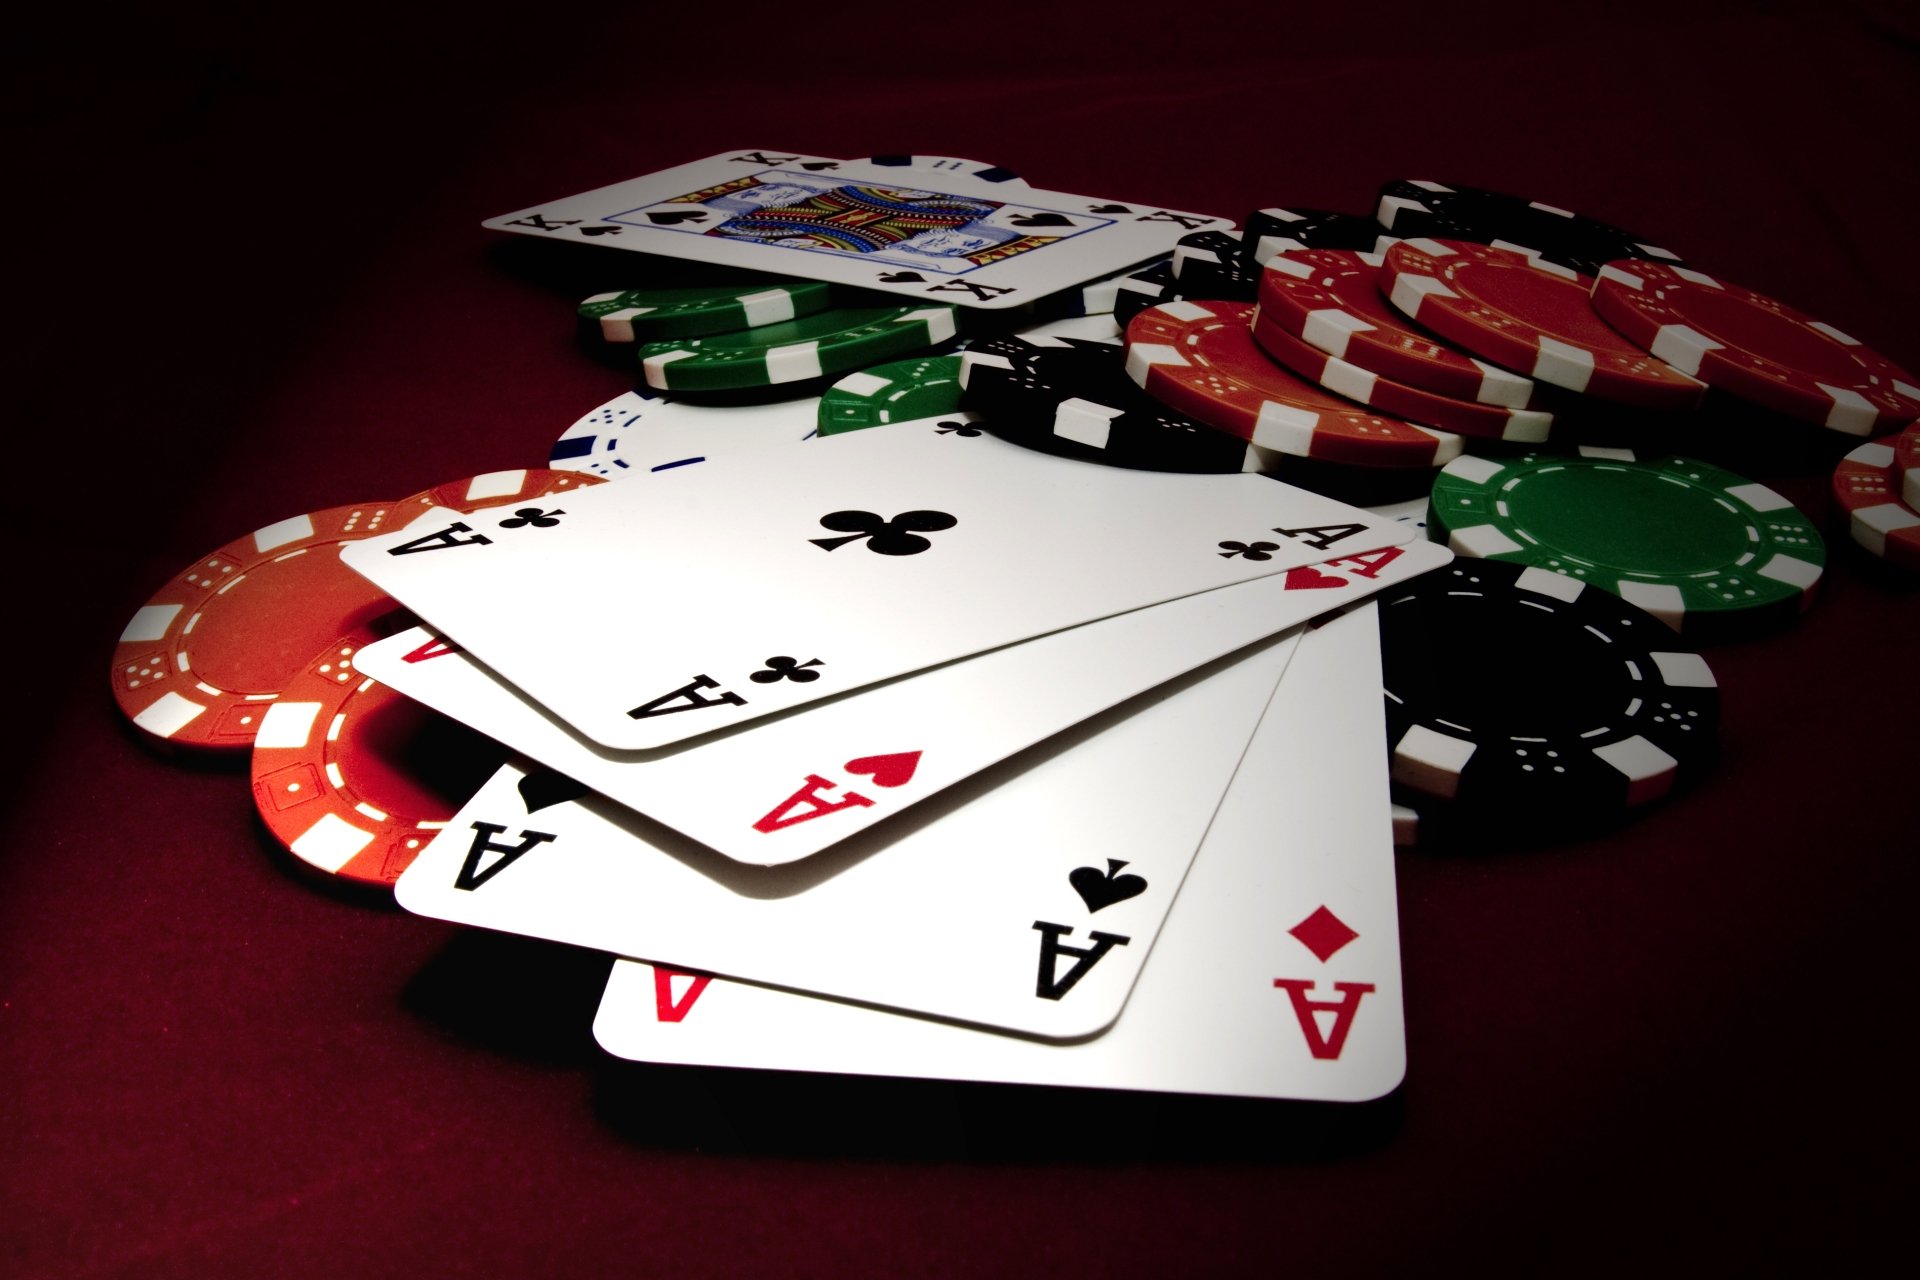 How To Play Online Poker In California